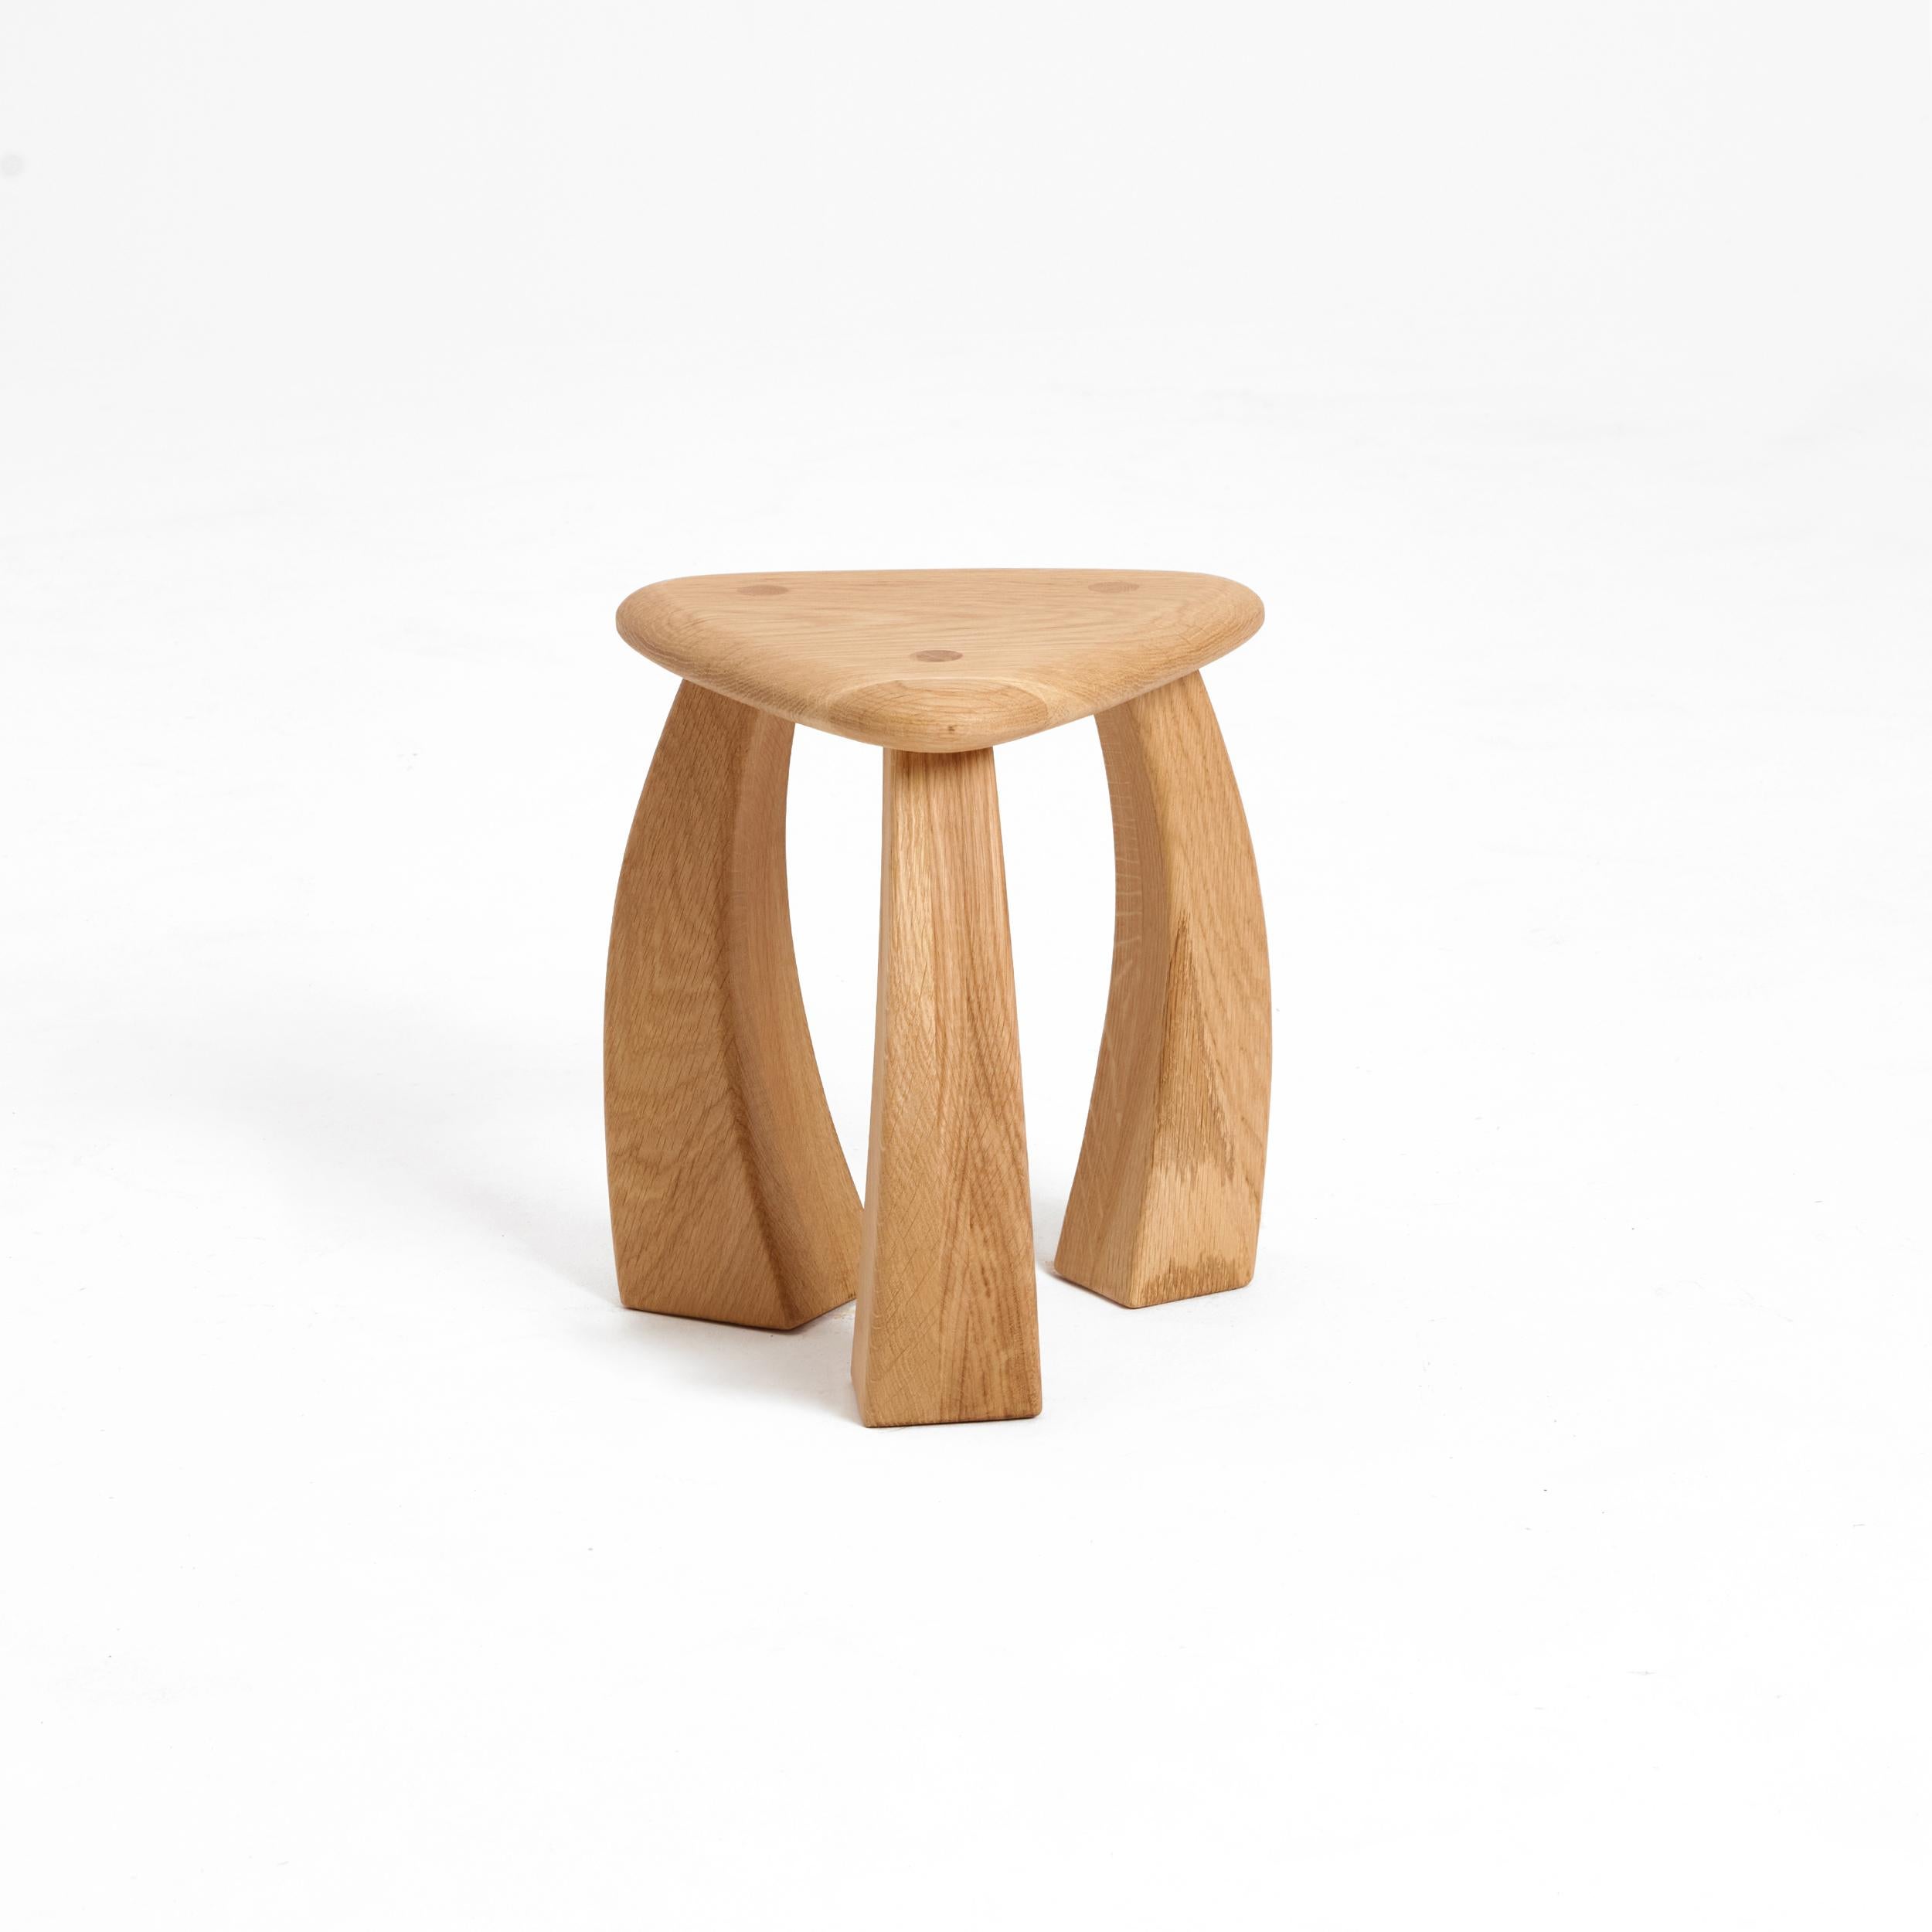 Arc de Stool '37 in Oak wood

Designed by Project 213A in 2022

The smaller version of the stool's legs curves inwards towards its triangular seat, fusing to showcase exquisite craftsmanship. The elegant complexion brings about the opportunity